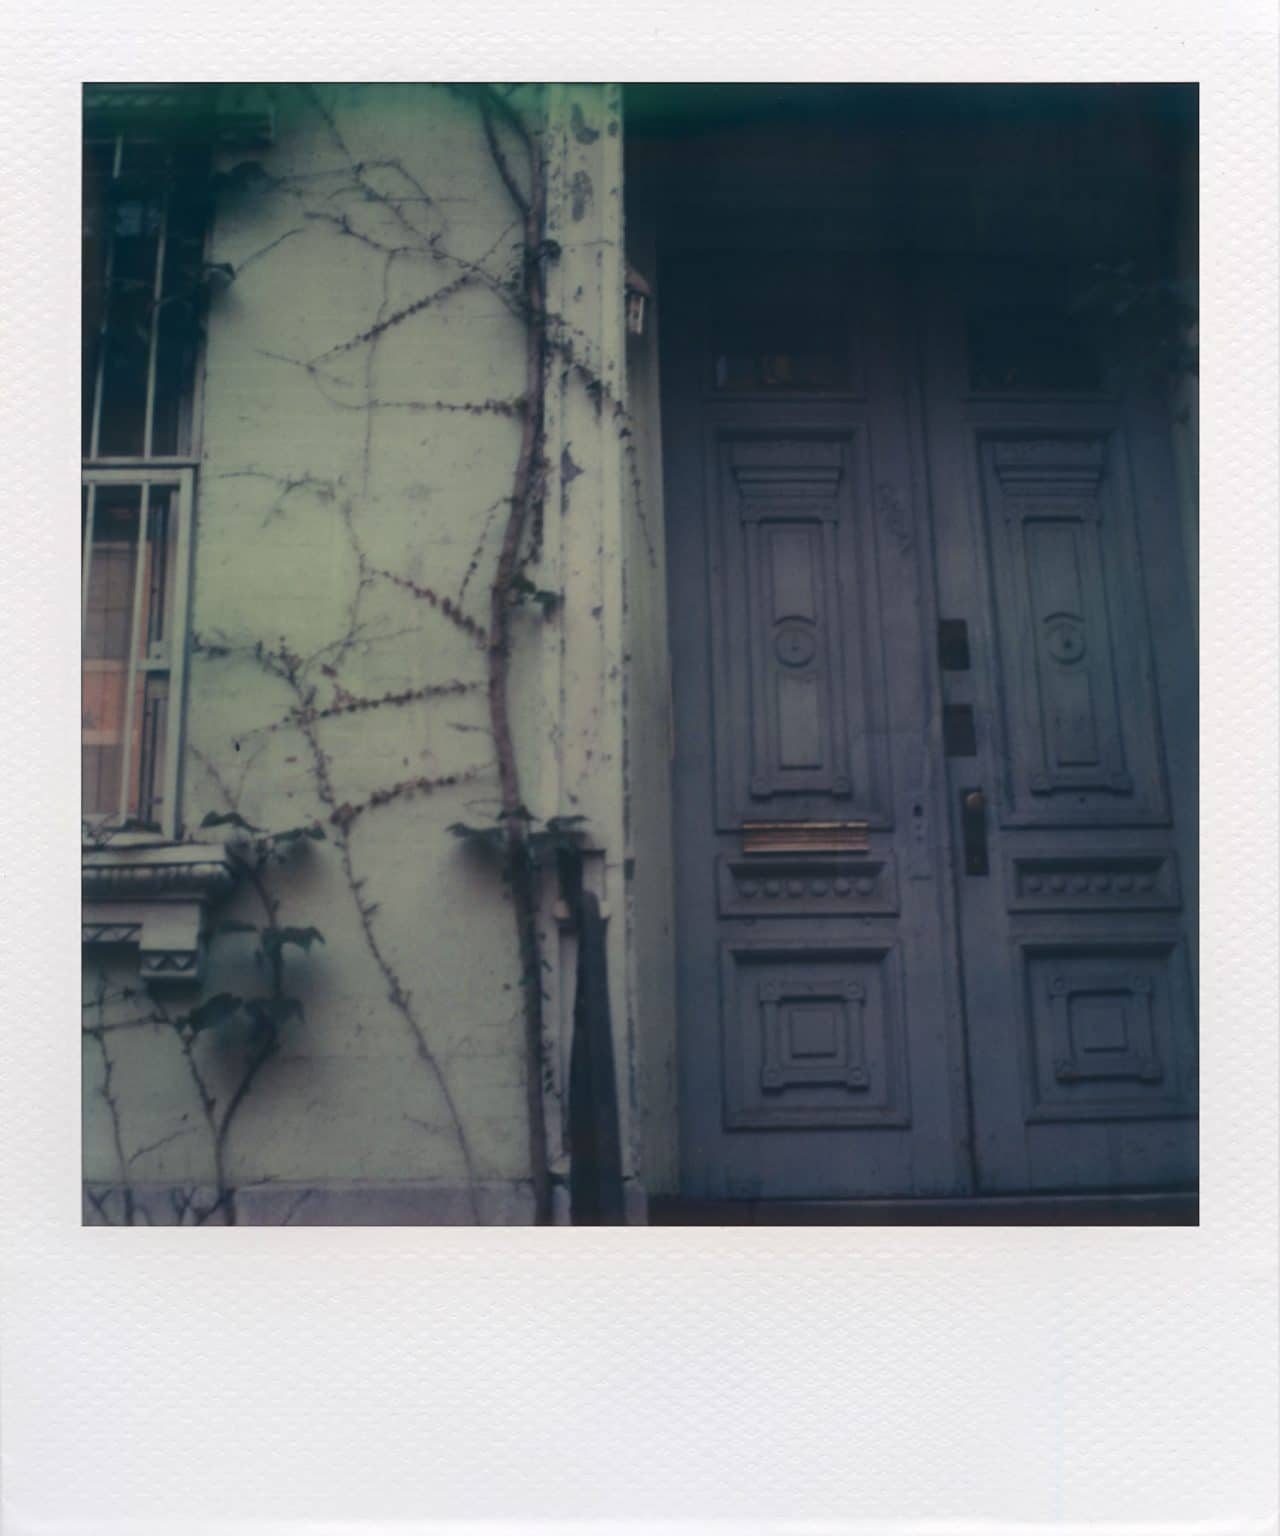 “East 7th St” (NYC 2008) - Polaroid SX-70 Alpha 1 Land Camera and first-edition TZ Artistic film